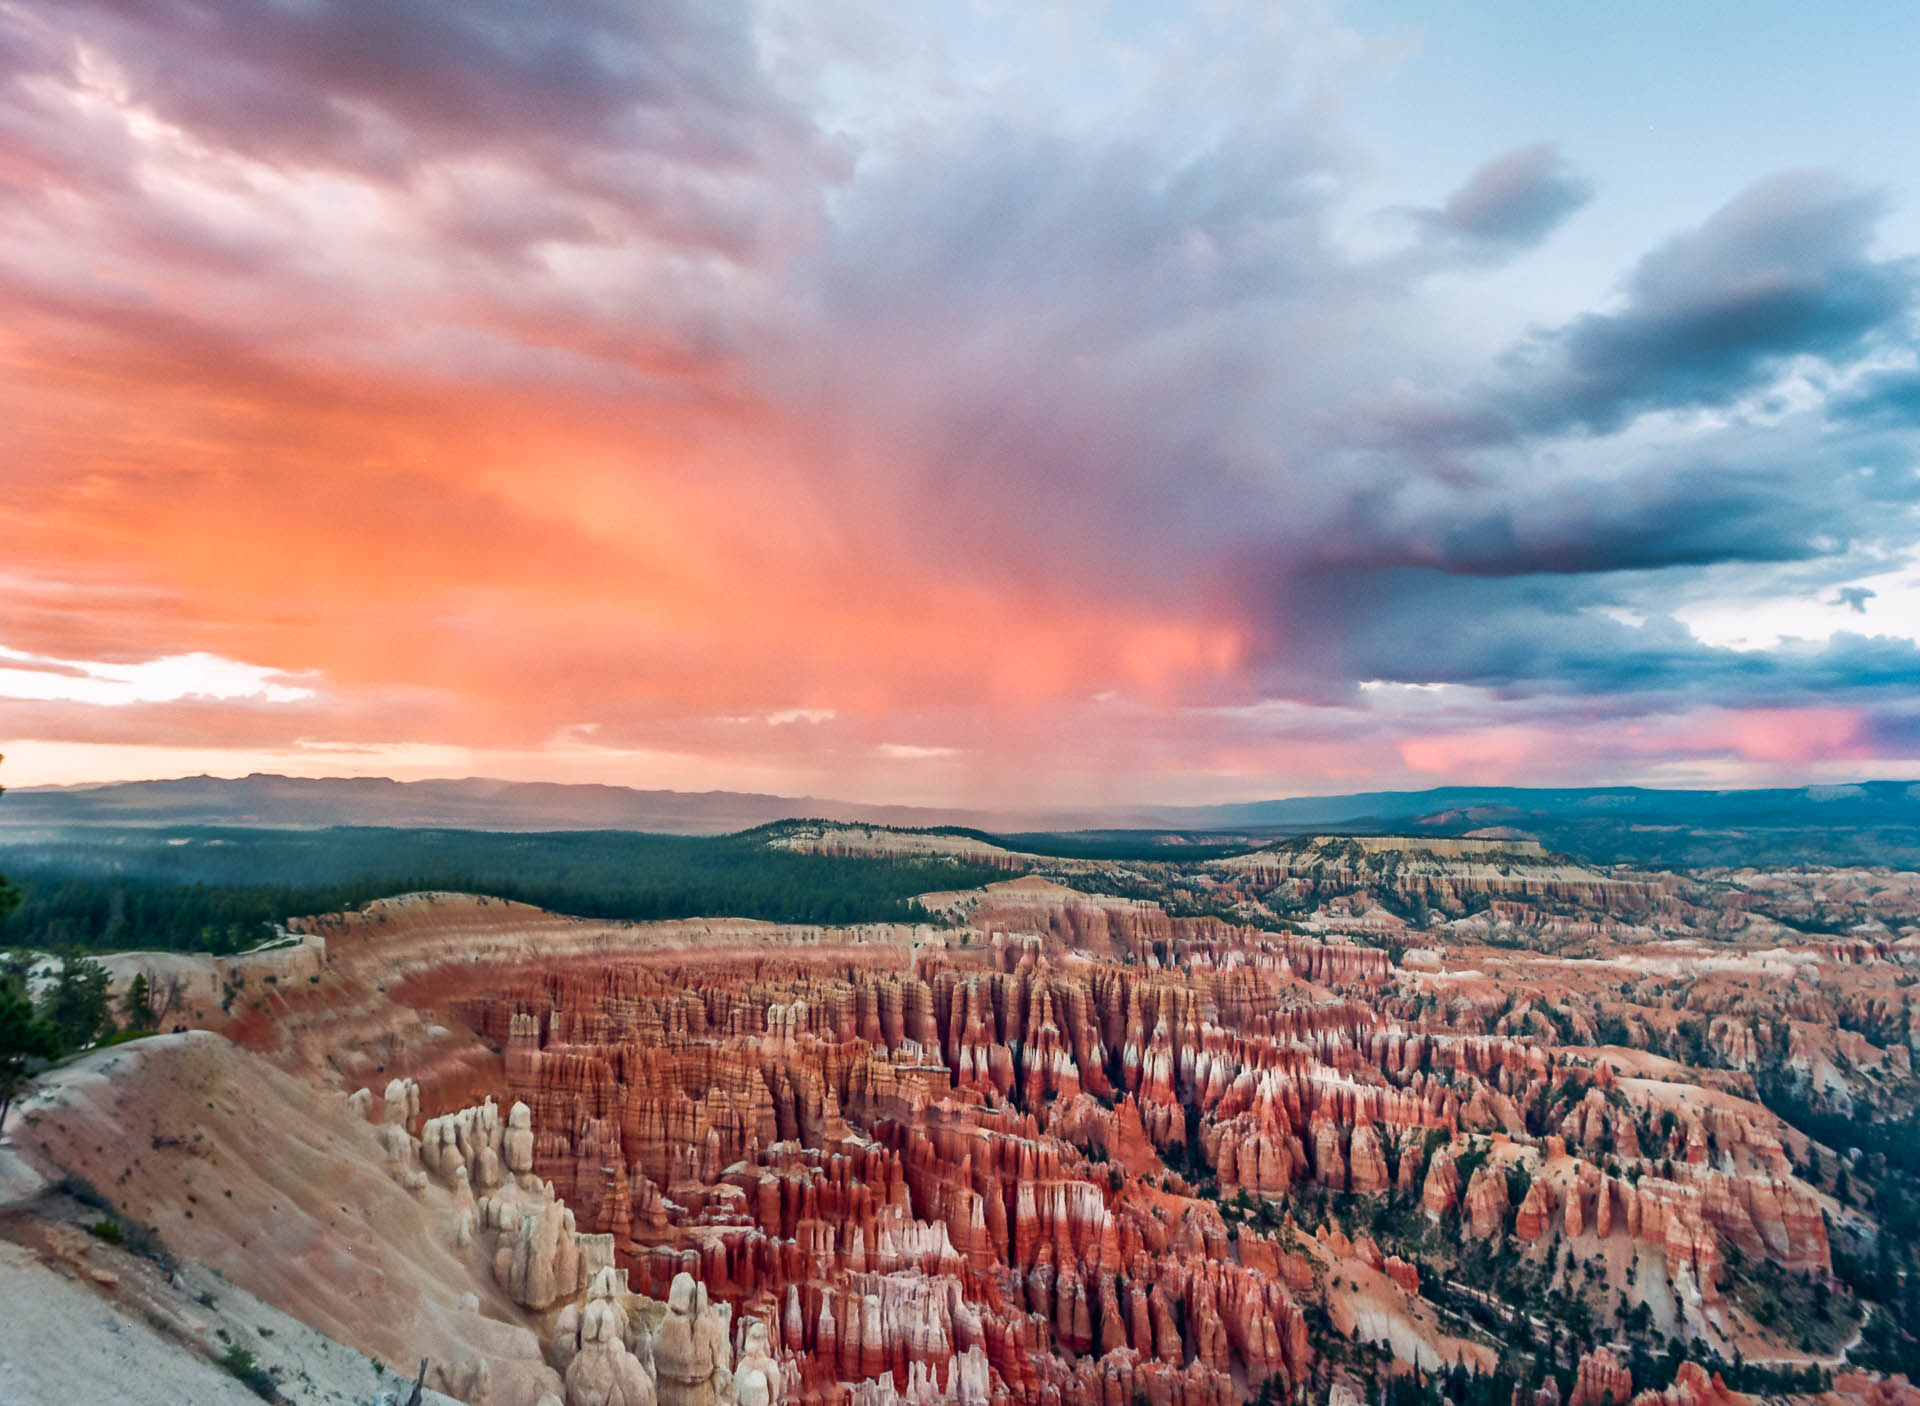 Tormented sunset in Bryce Canyon